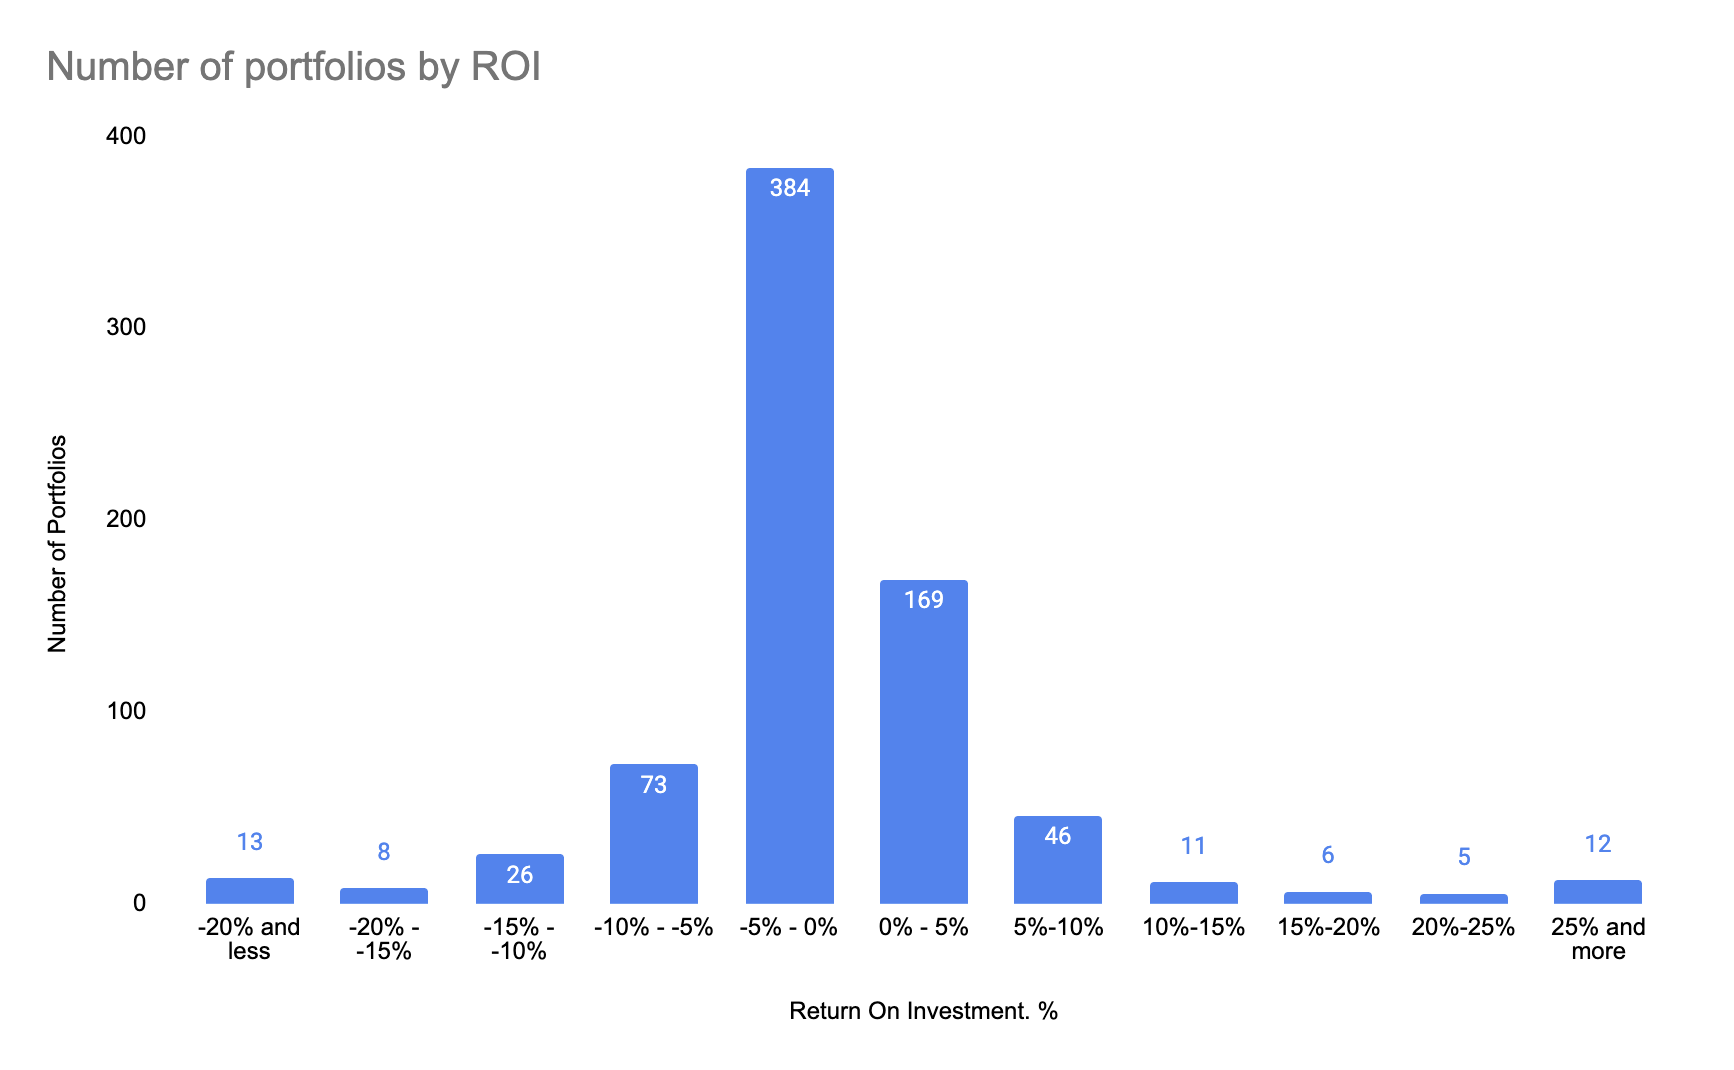 # of portfolios grouped by their Return On Investment